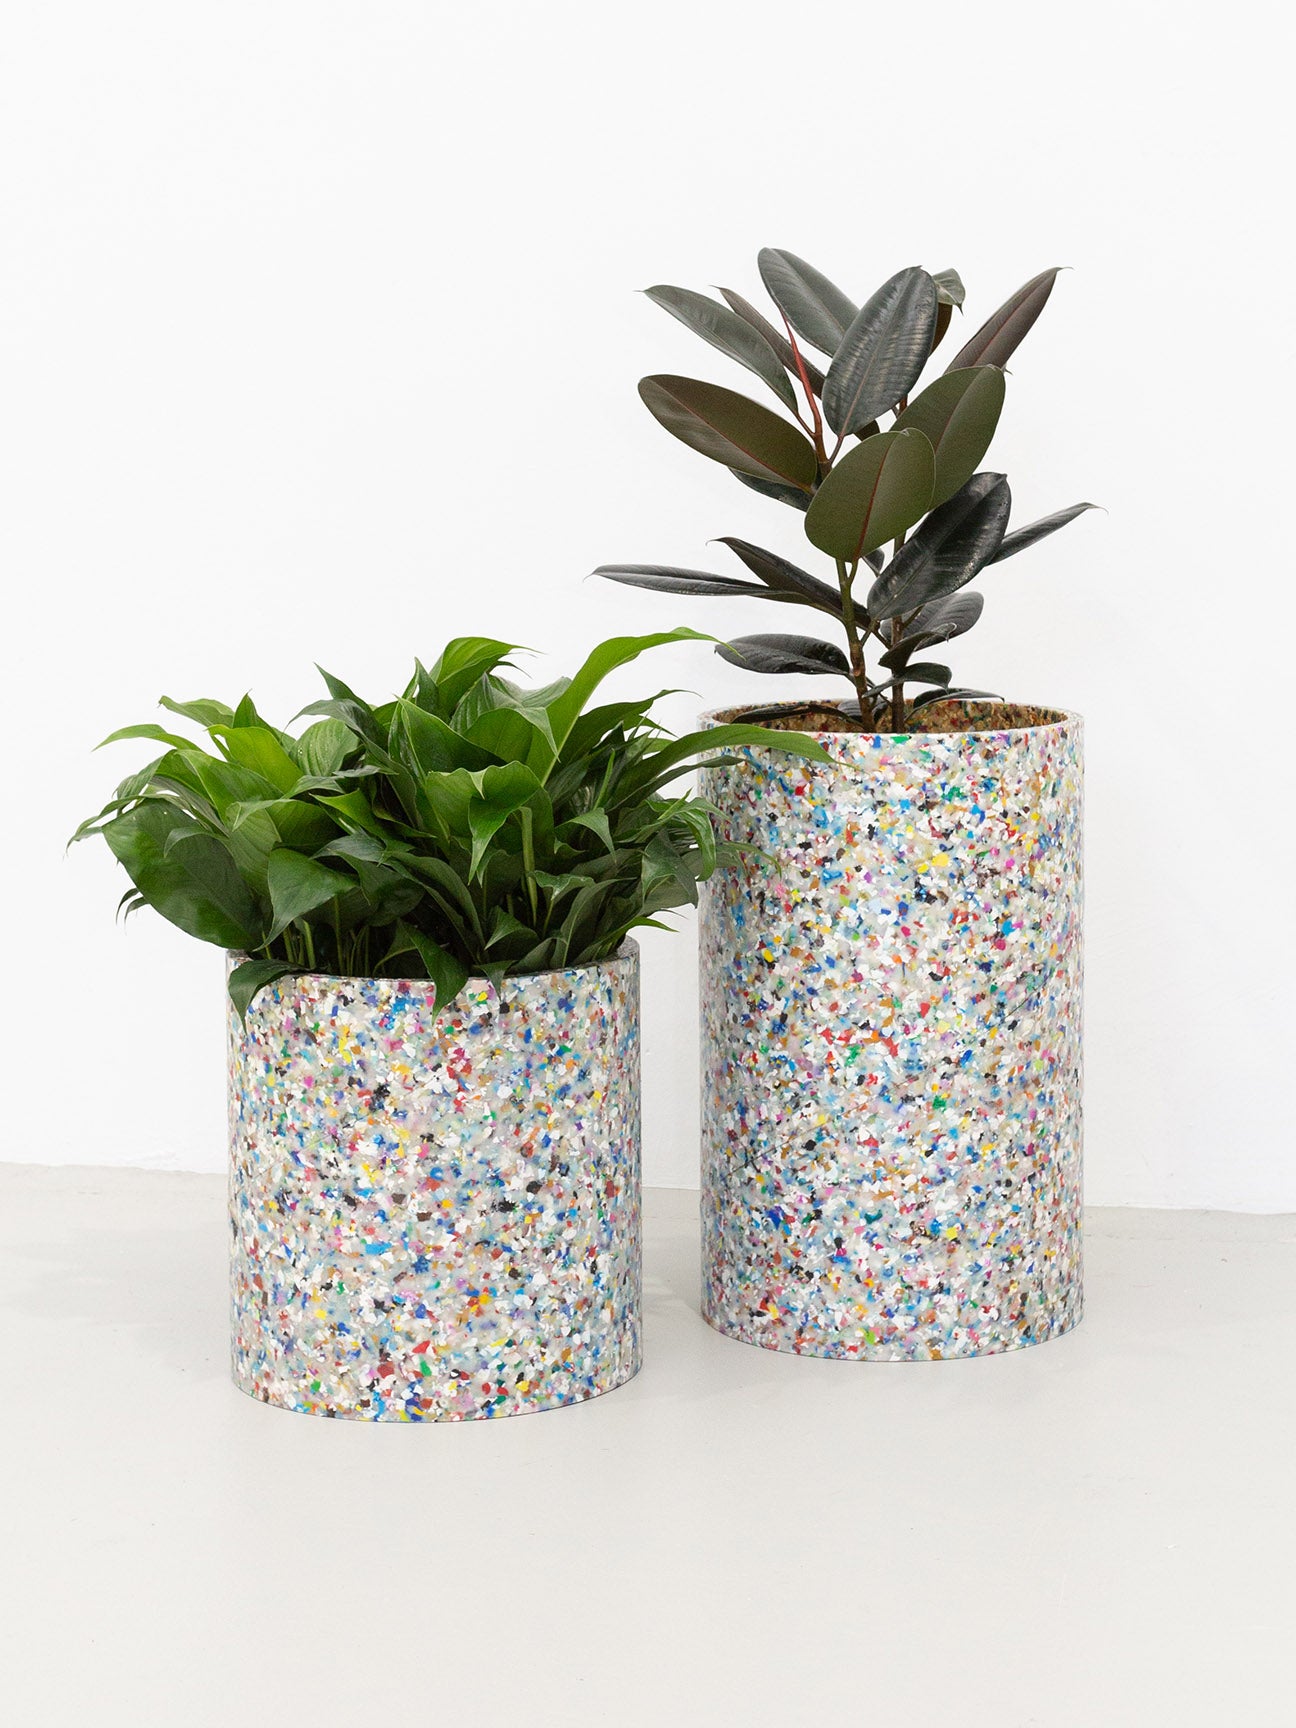 Recycled Plastic Planter